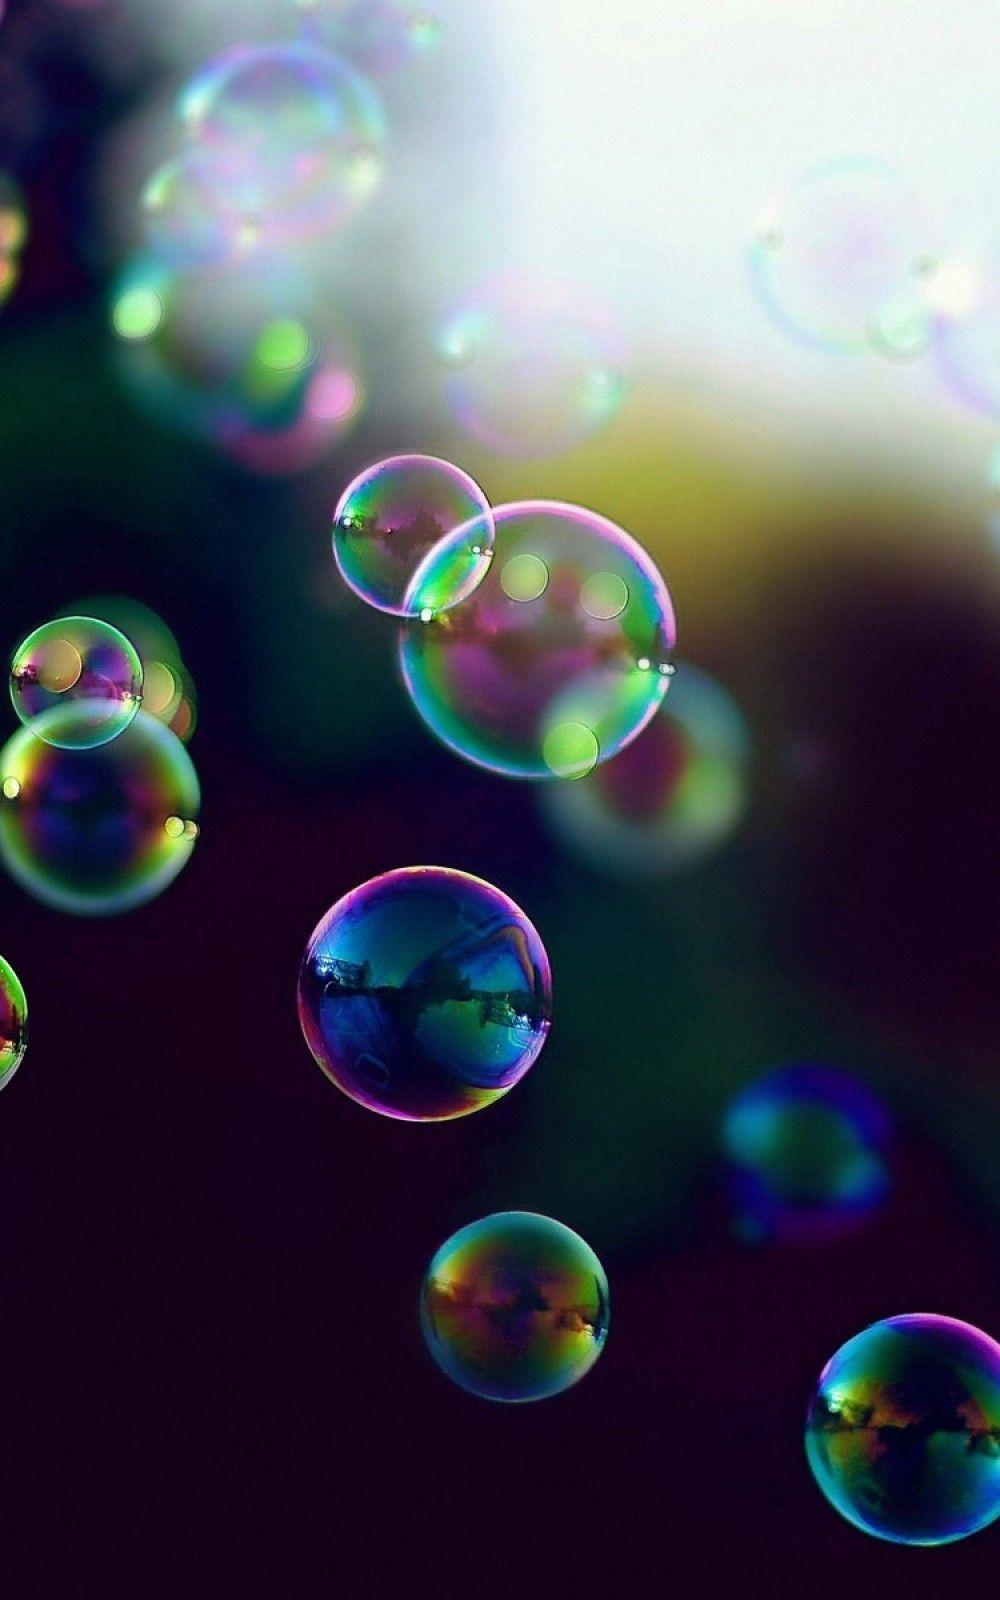 Colorful Bubbles Wallpapers